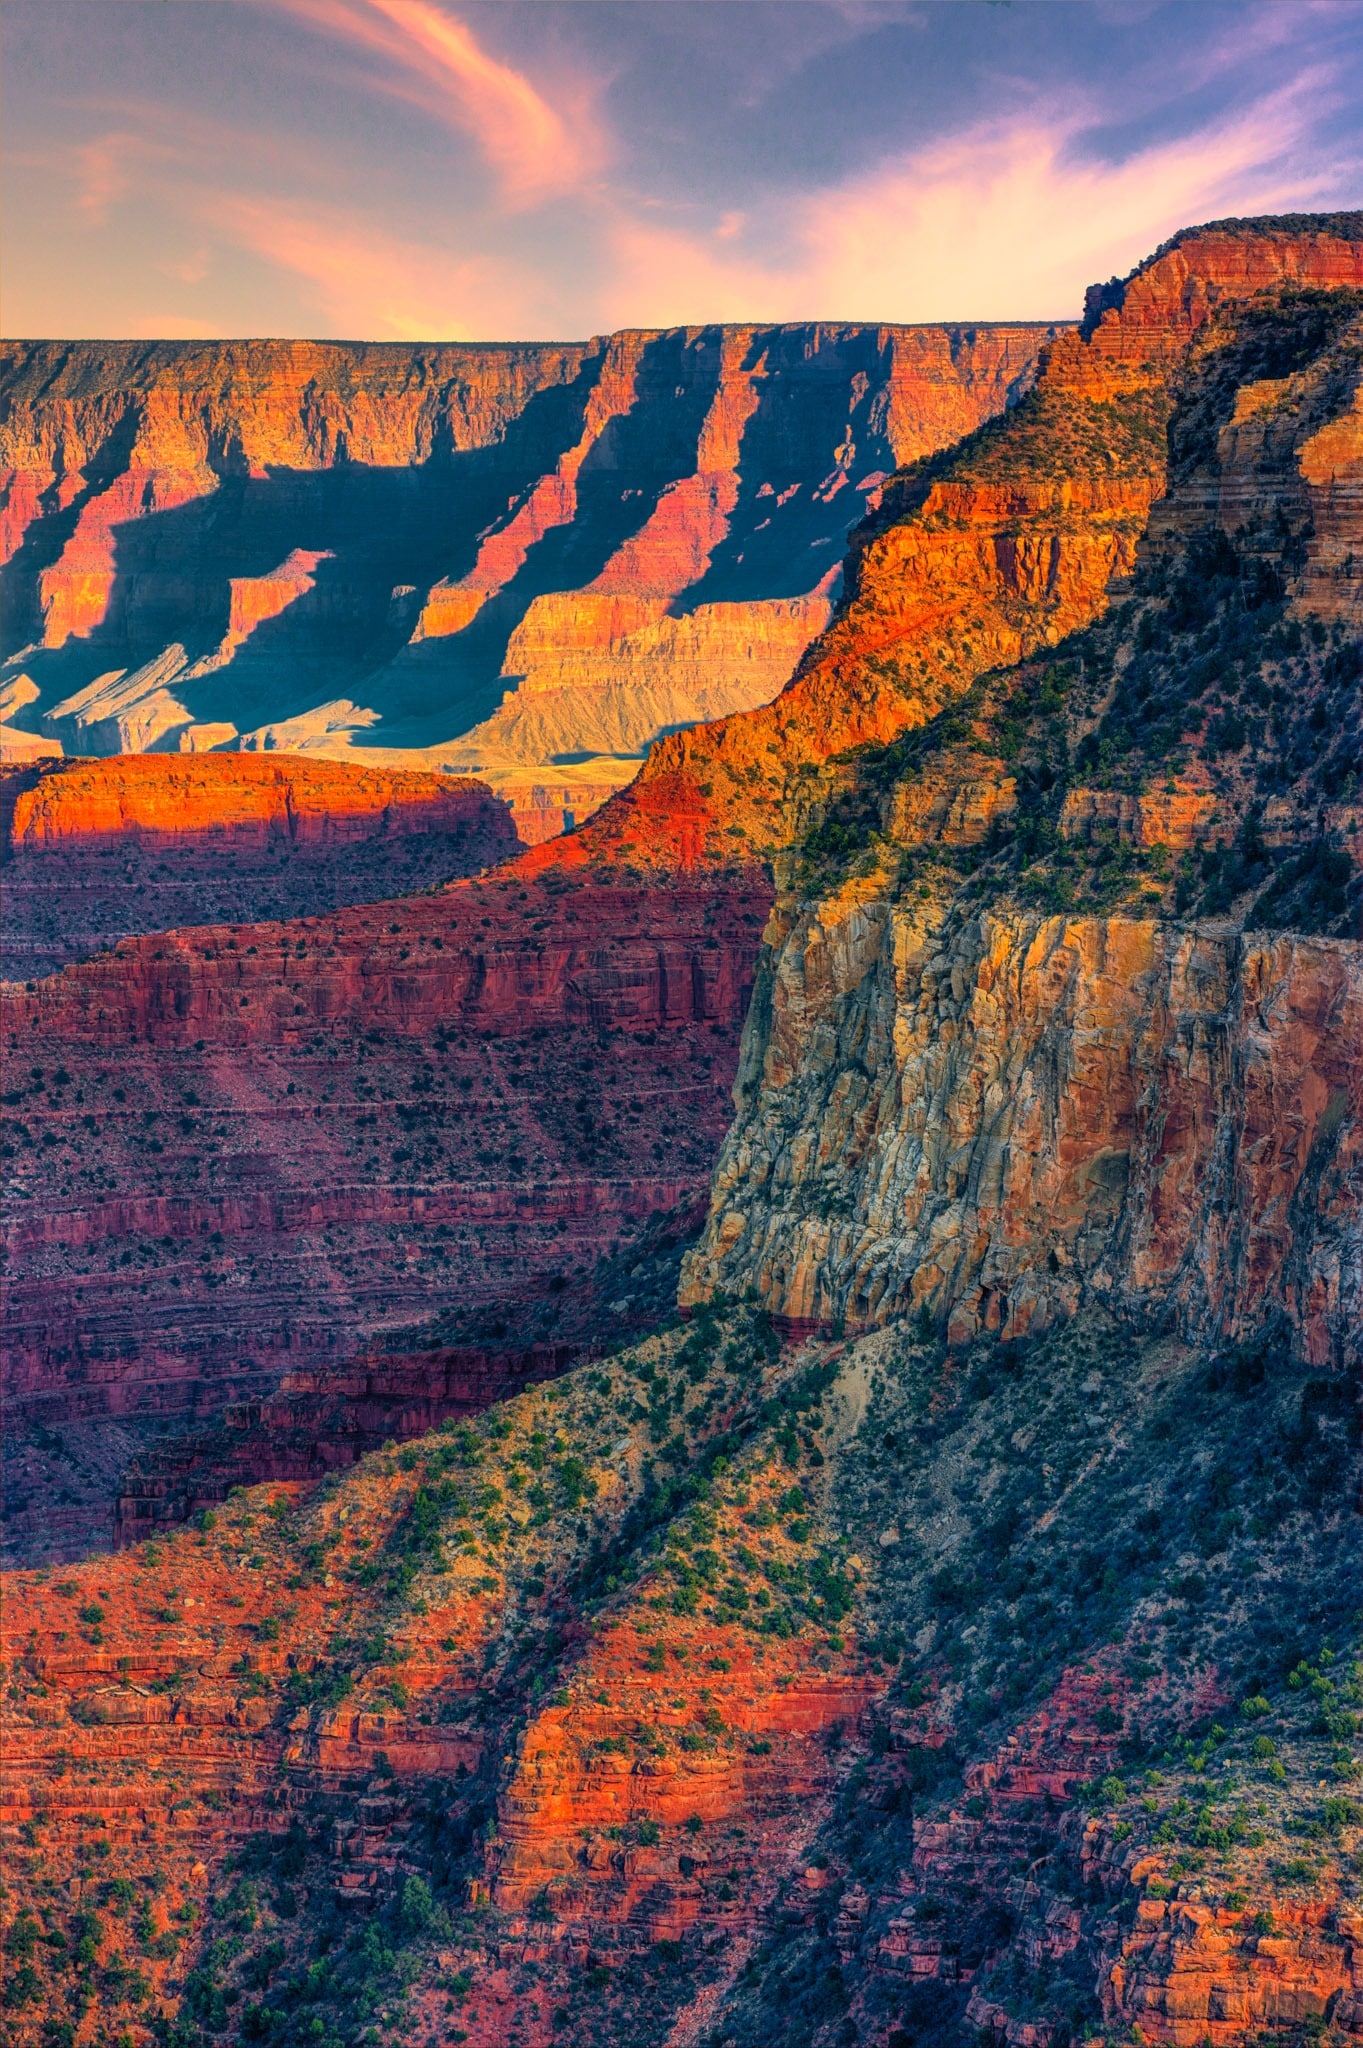 A view of the upper rock formations of the Grand Canyon as seen from the South Rim in Arizona.